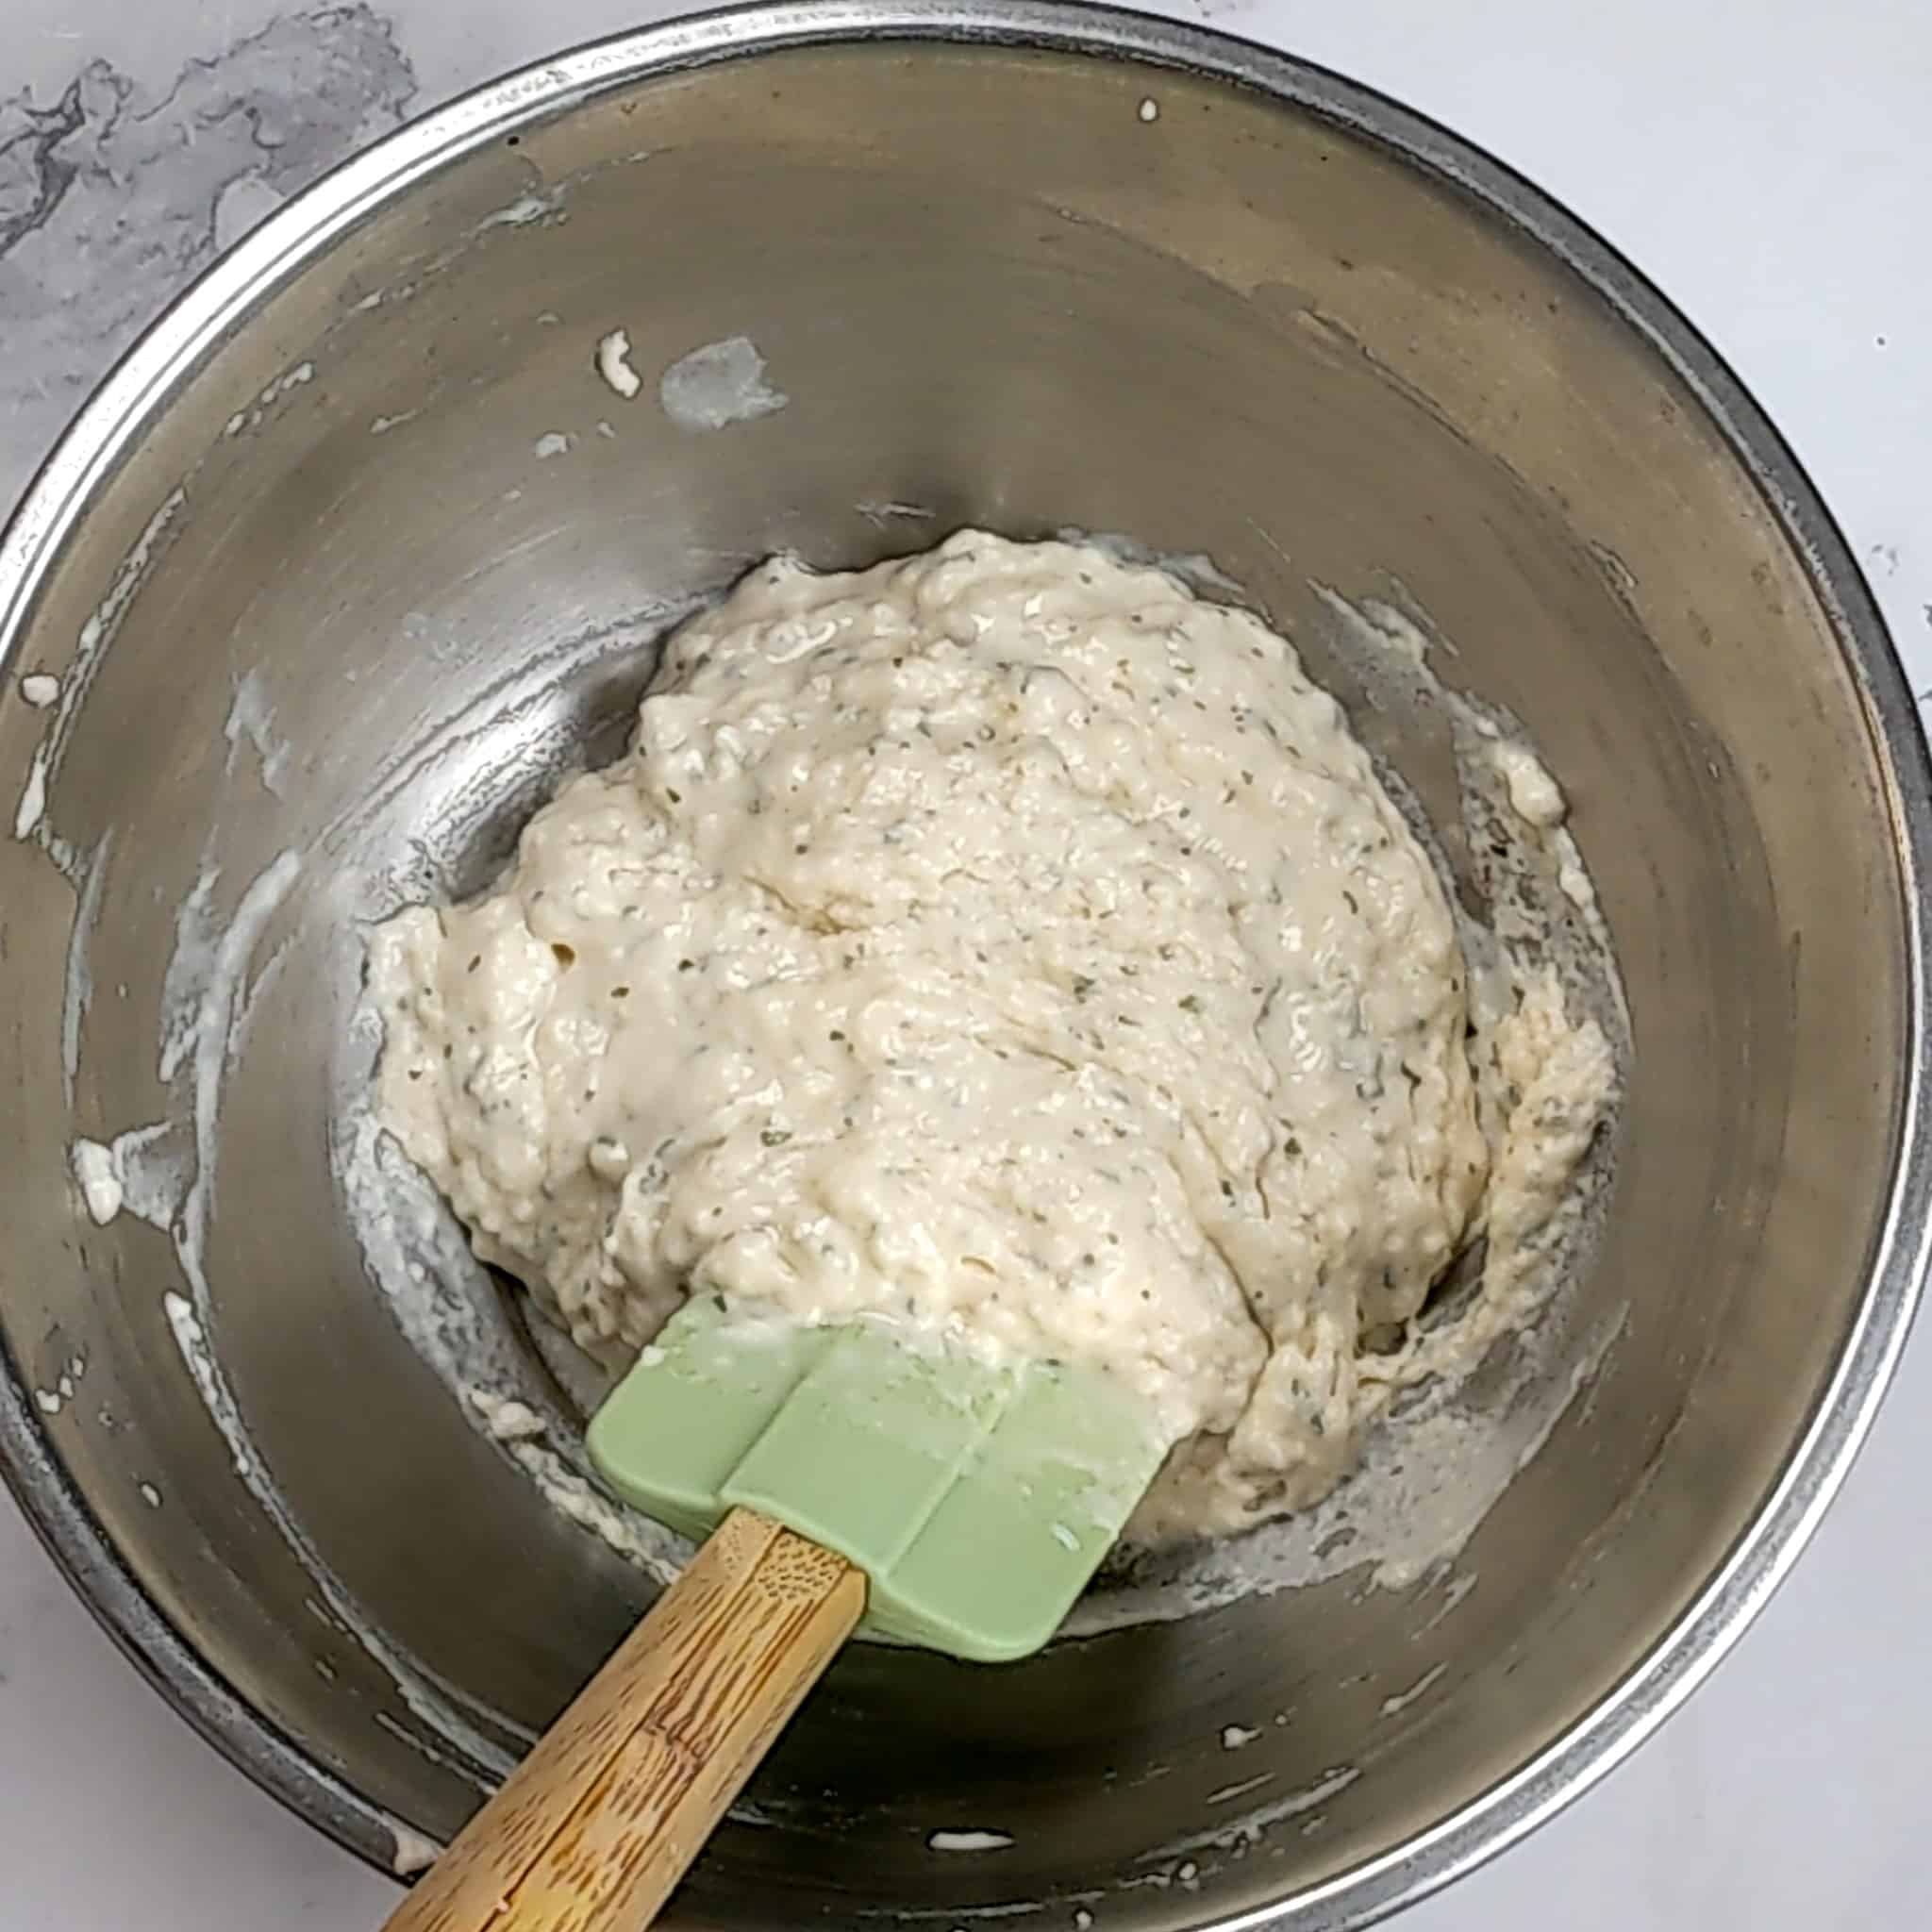 dumpling dough batter resting in a stainless steel mixing bowl with a silicon spatula with a wooden handle